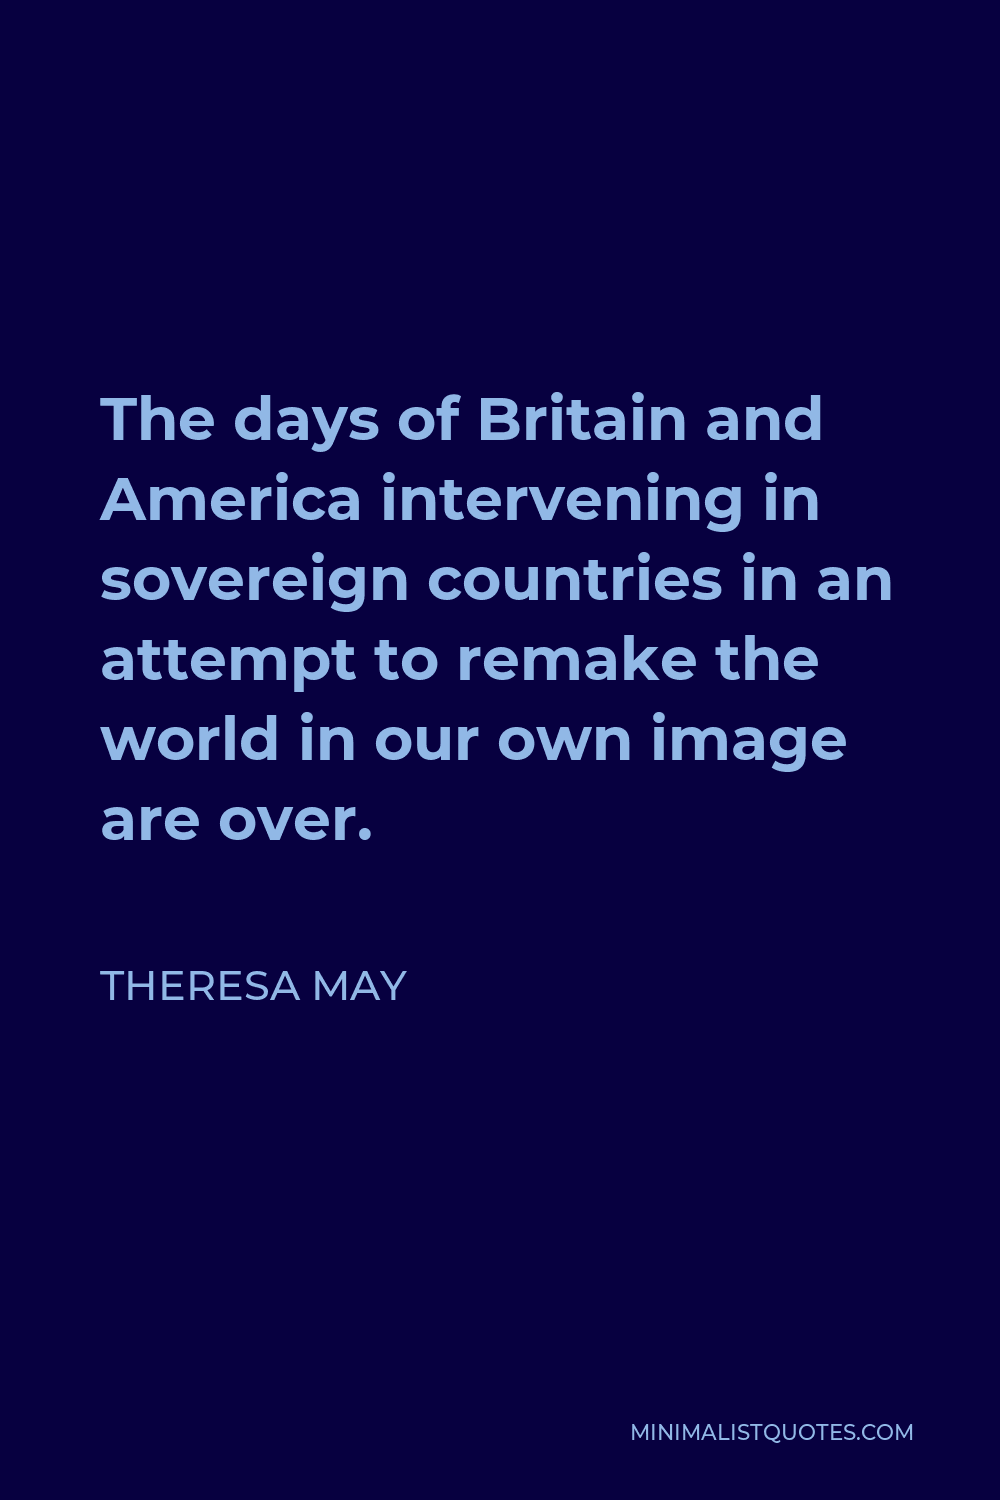 Theresa May Quote - The days of Britain and America intervening in sovereign countries in an attempt to remake the world in our own image are over.